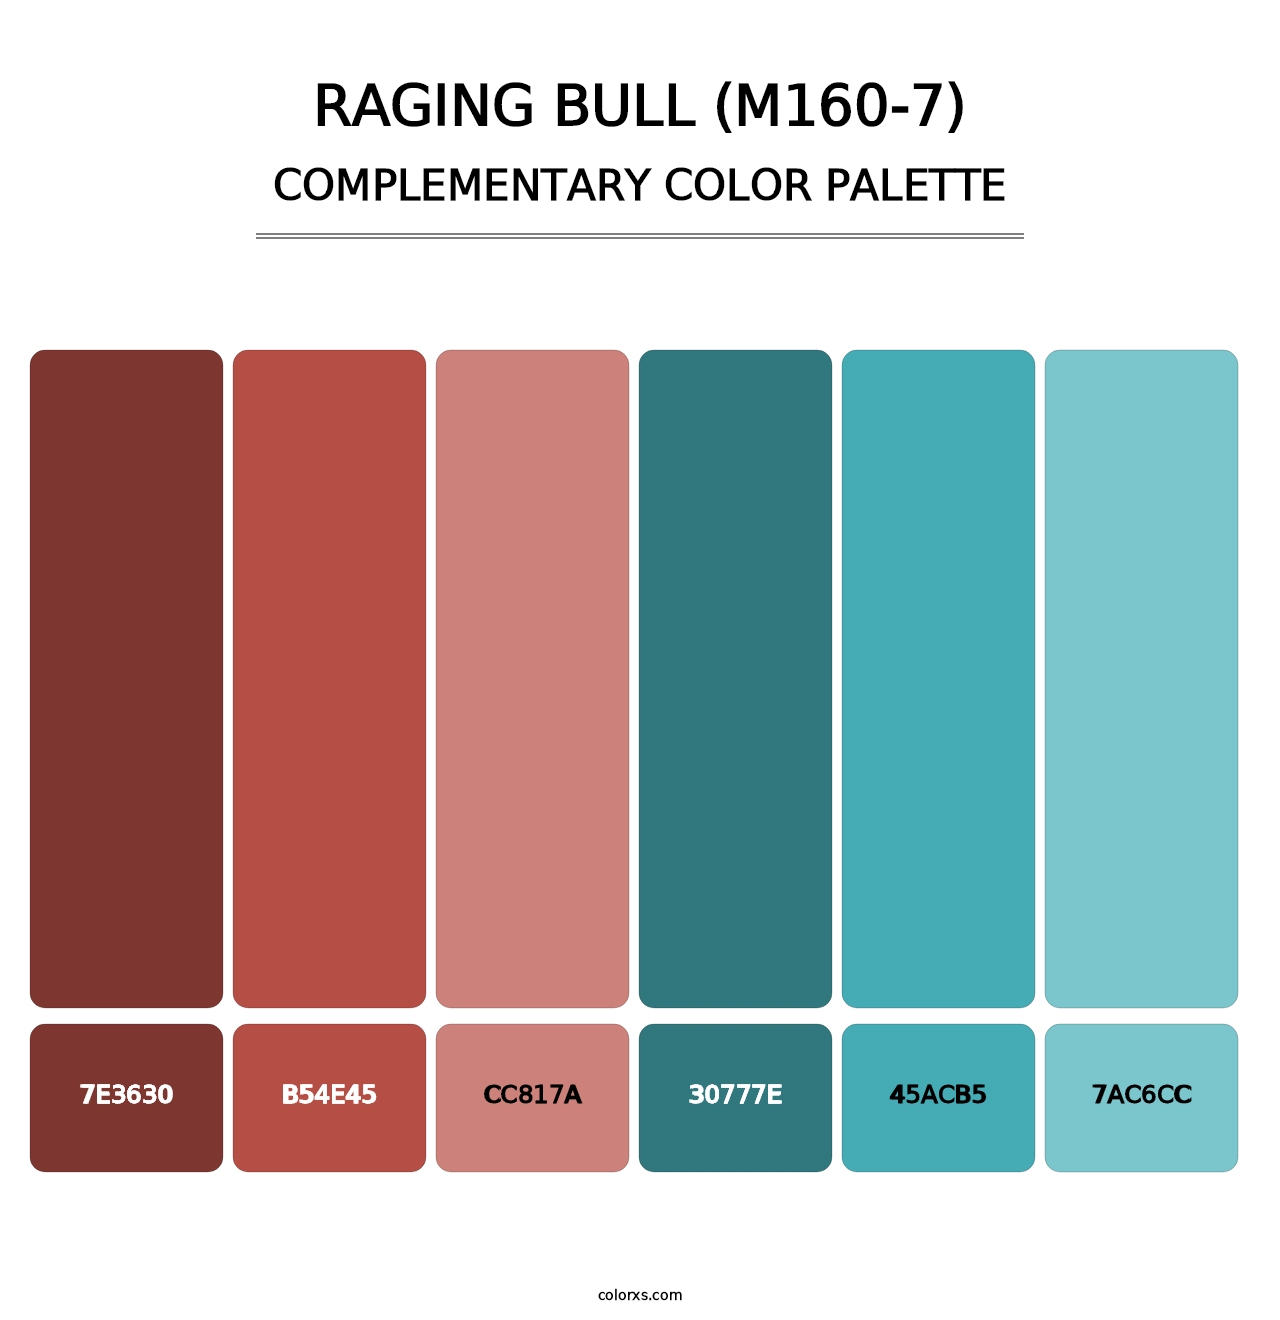 Raging Bull (M160-7) - Complementary Color Palette